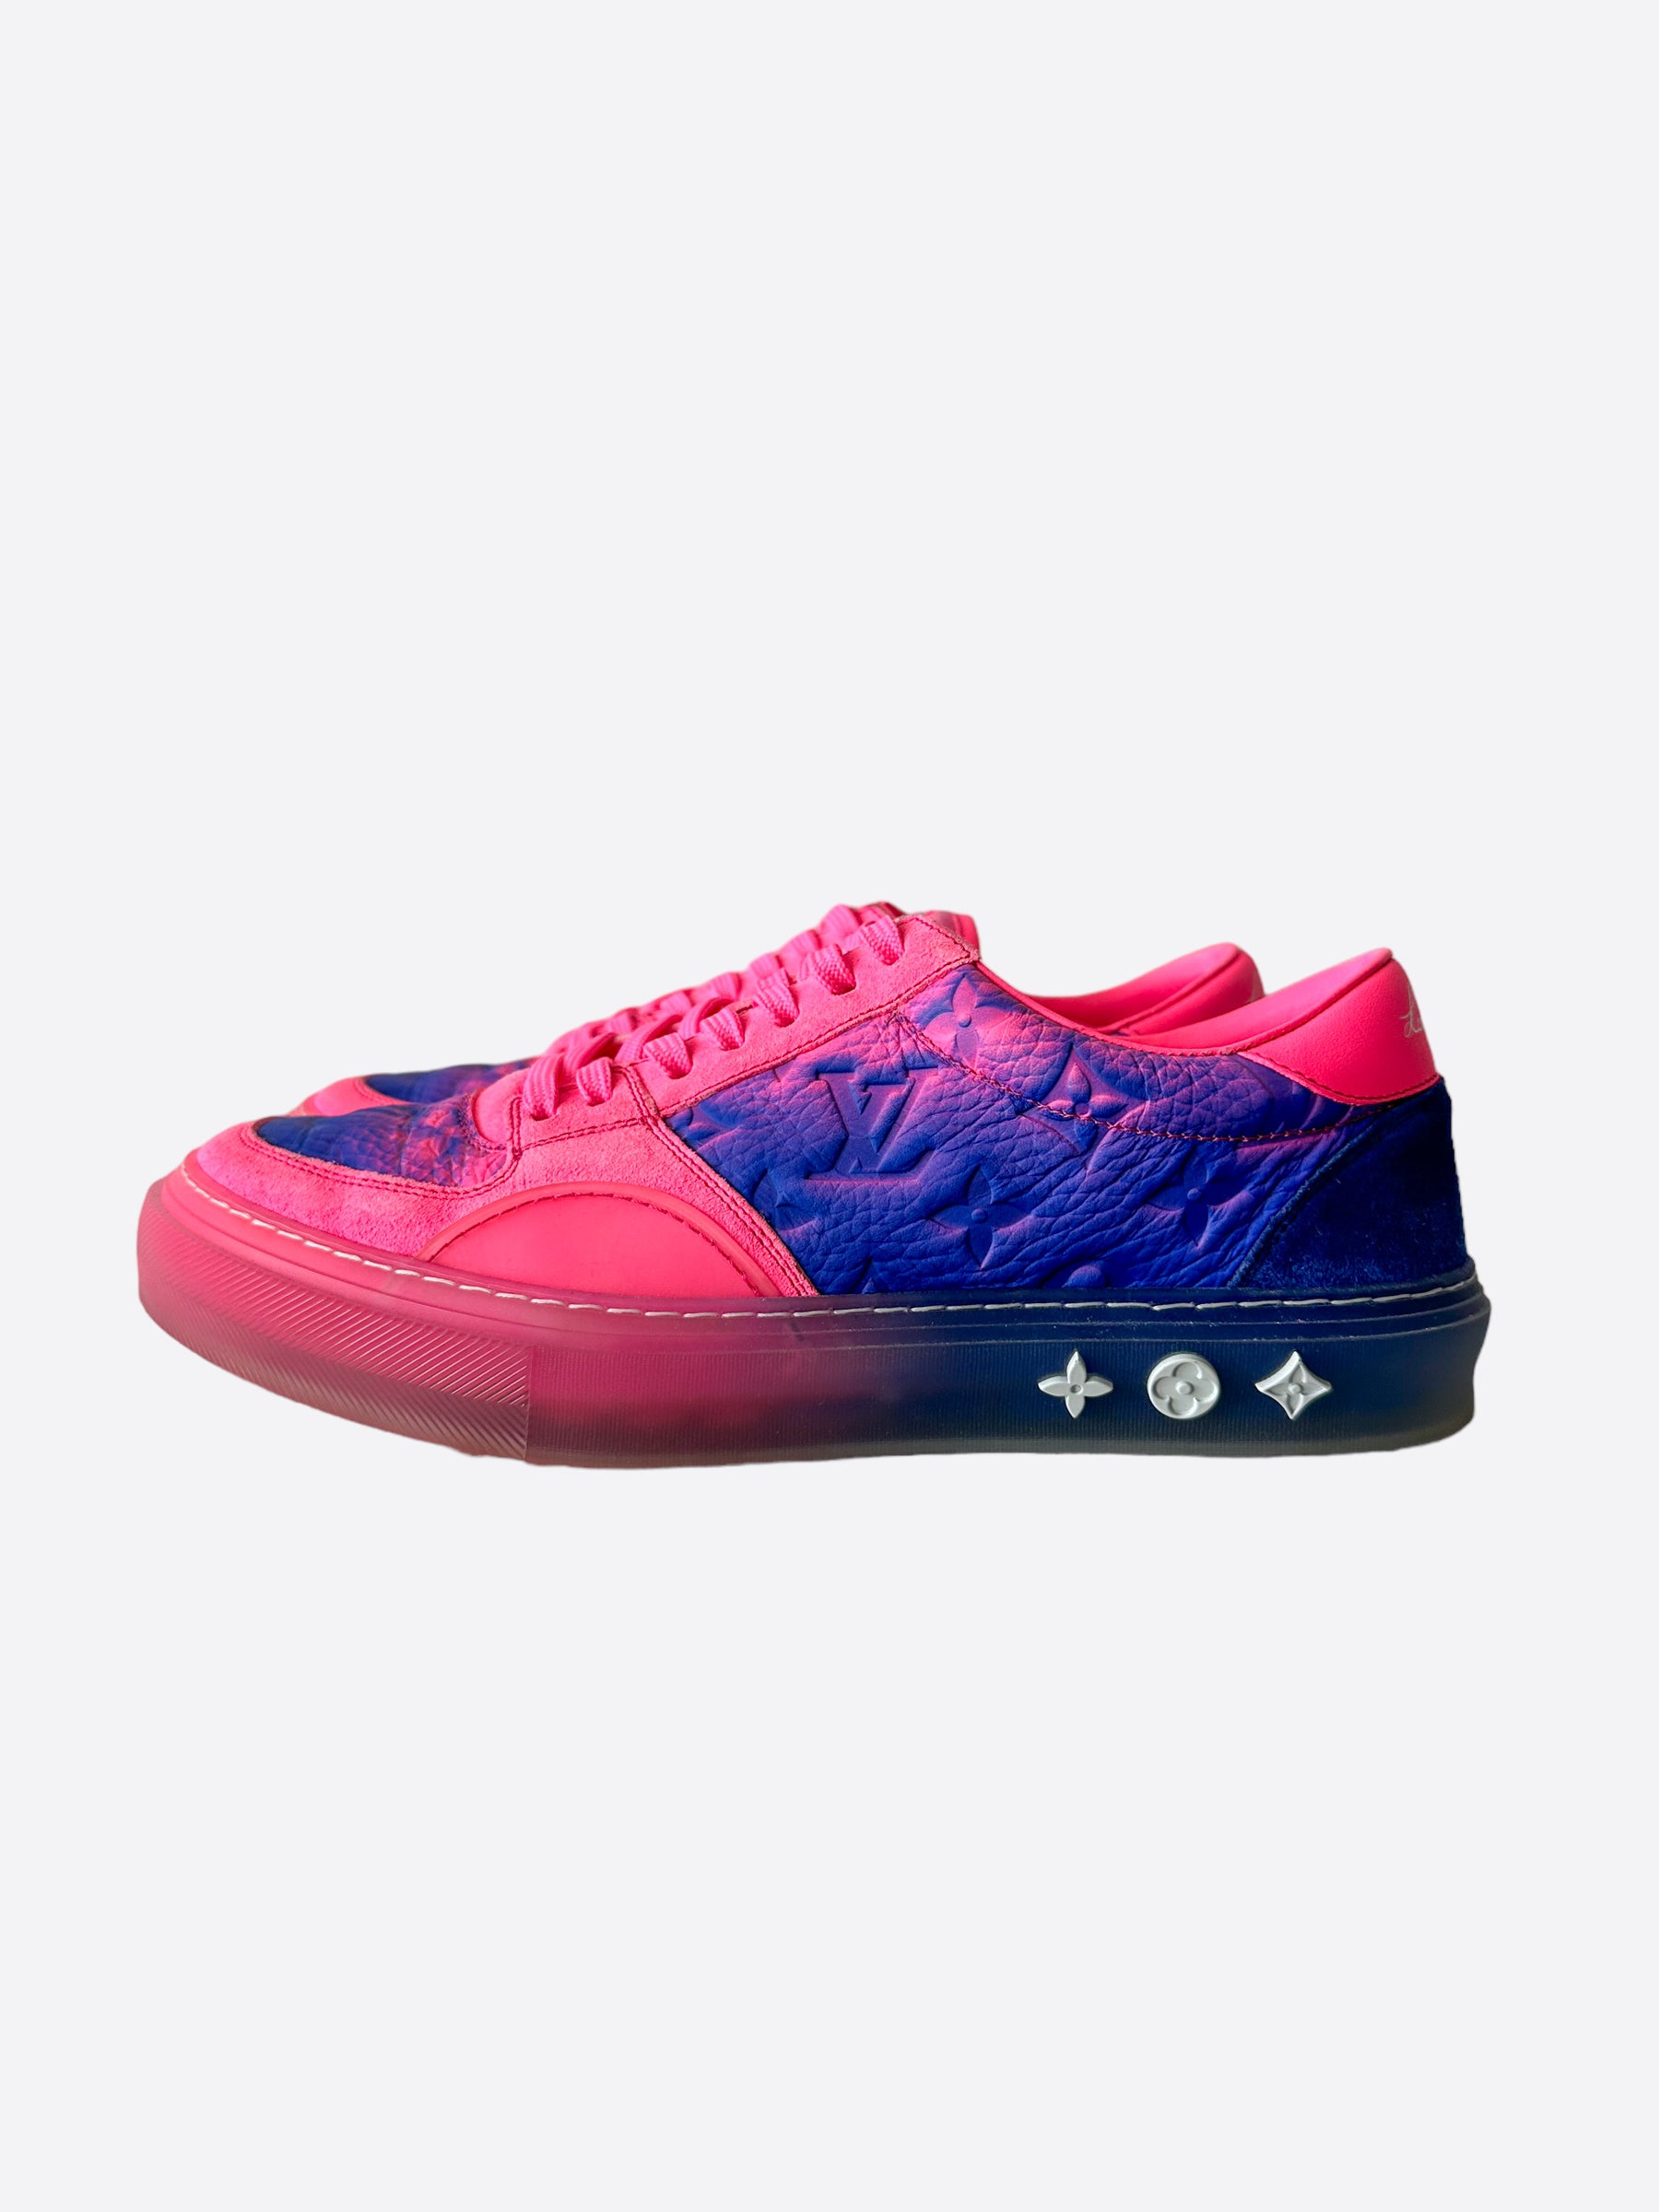 louis vuitton colorful sneakers